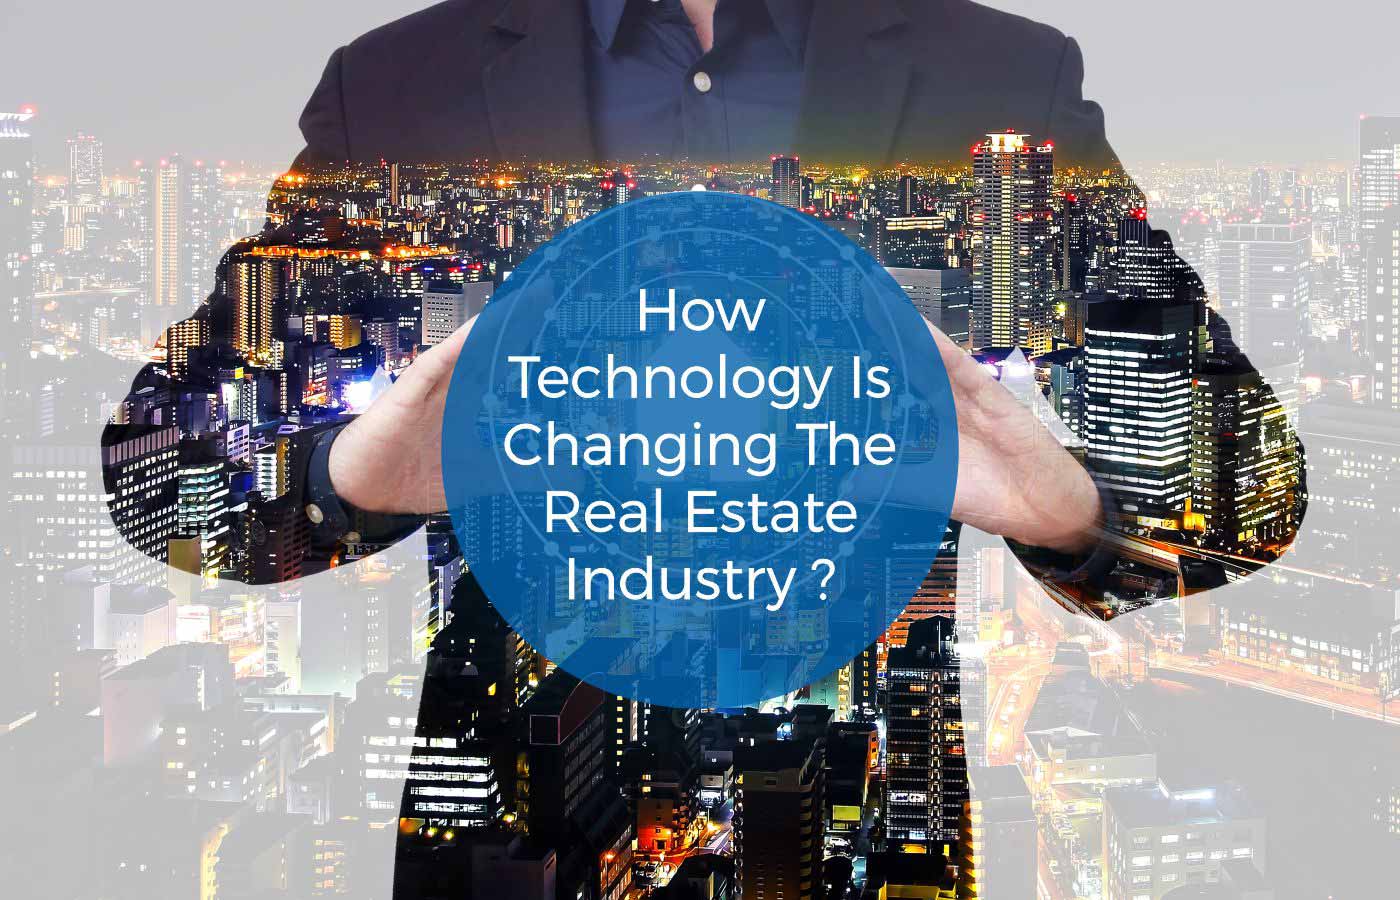 How Technology Is Changing the Real Estate Industry?